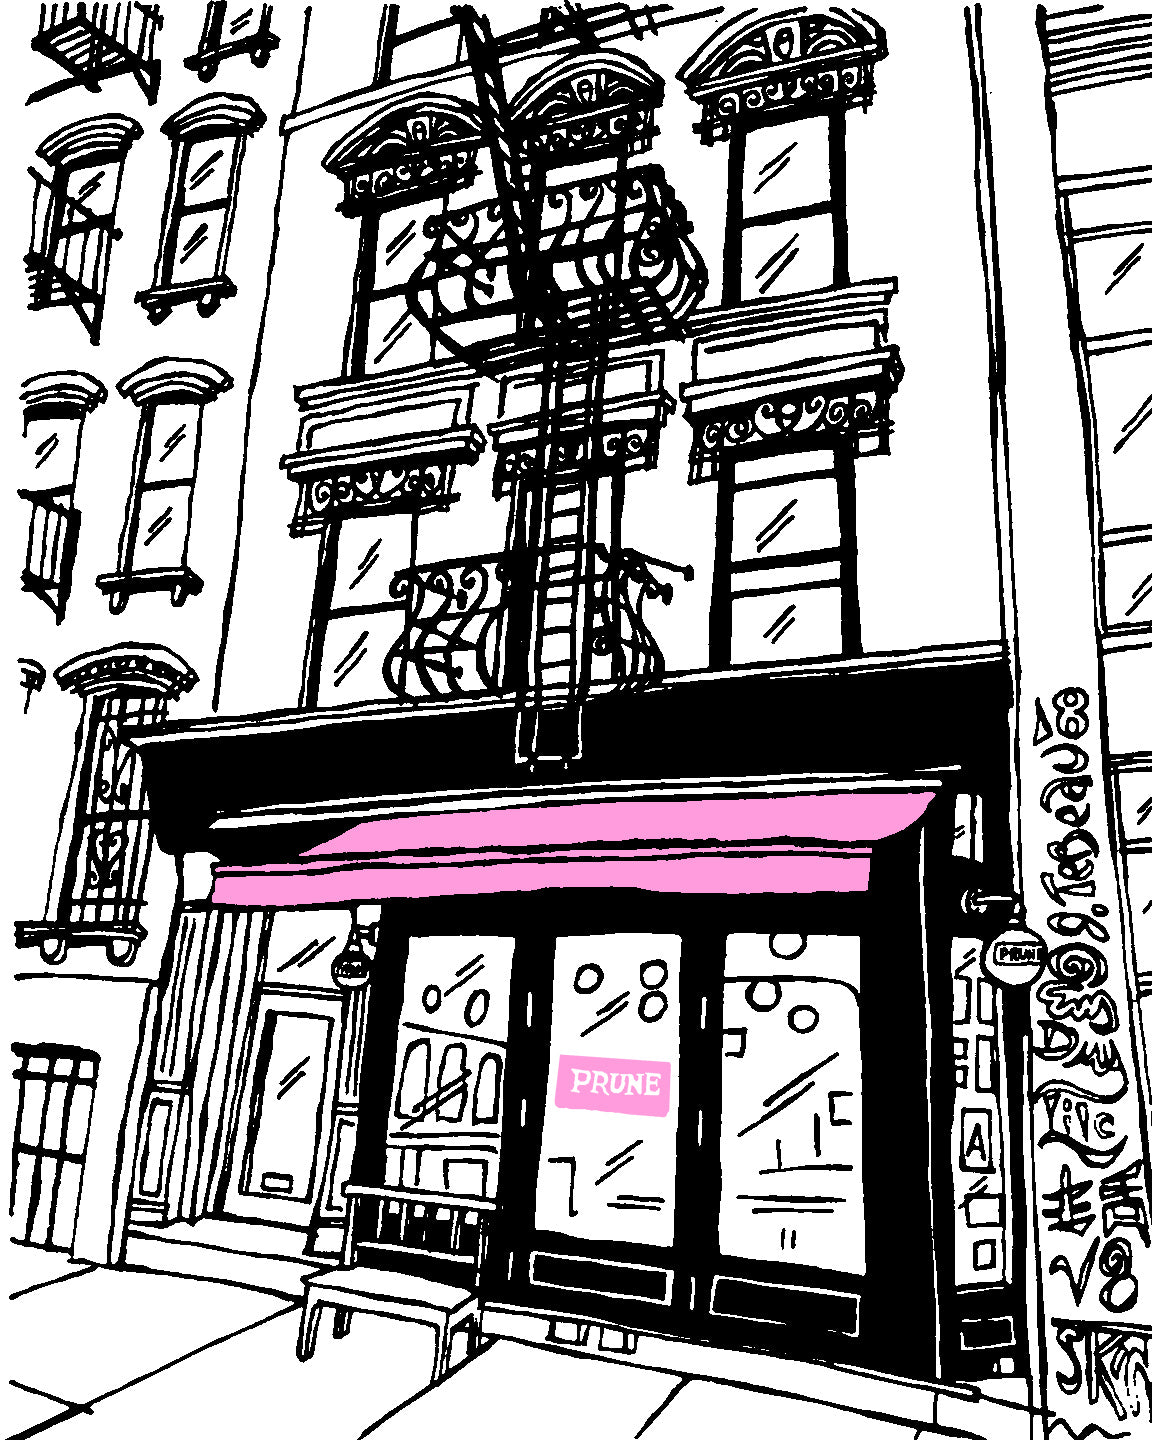 Prune restaurant of New York City signed prints. (ships free in the US)